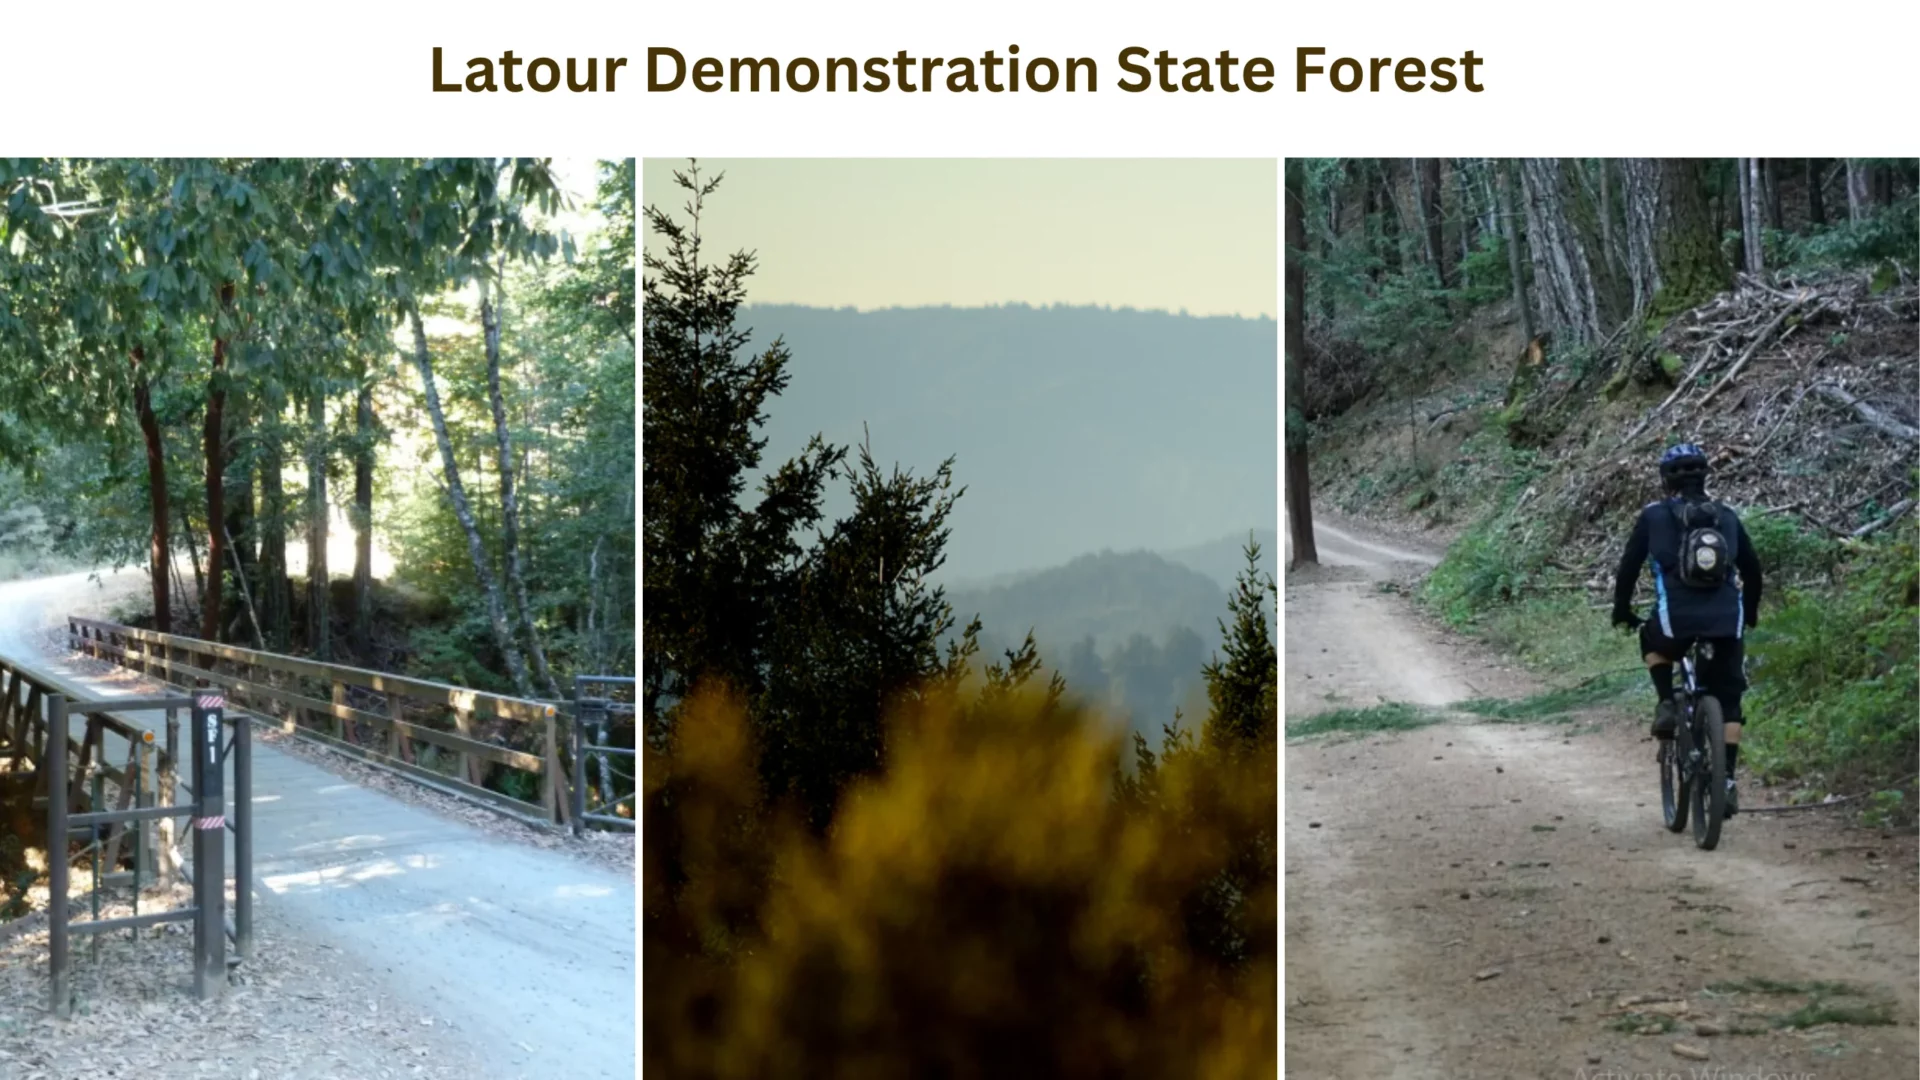 Latour Demonstration State Forest